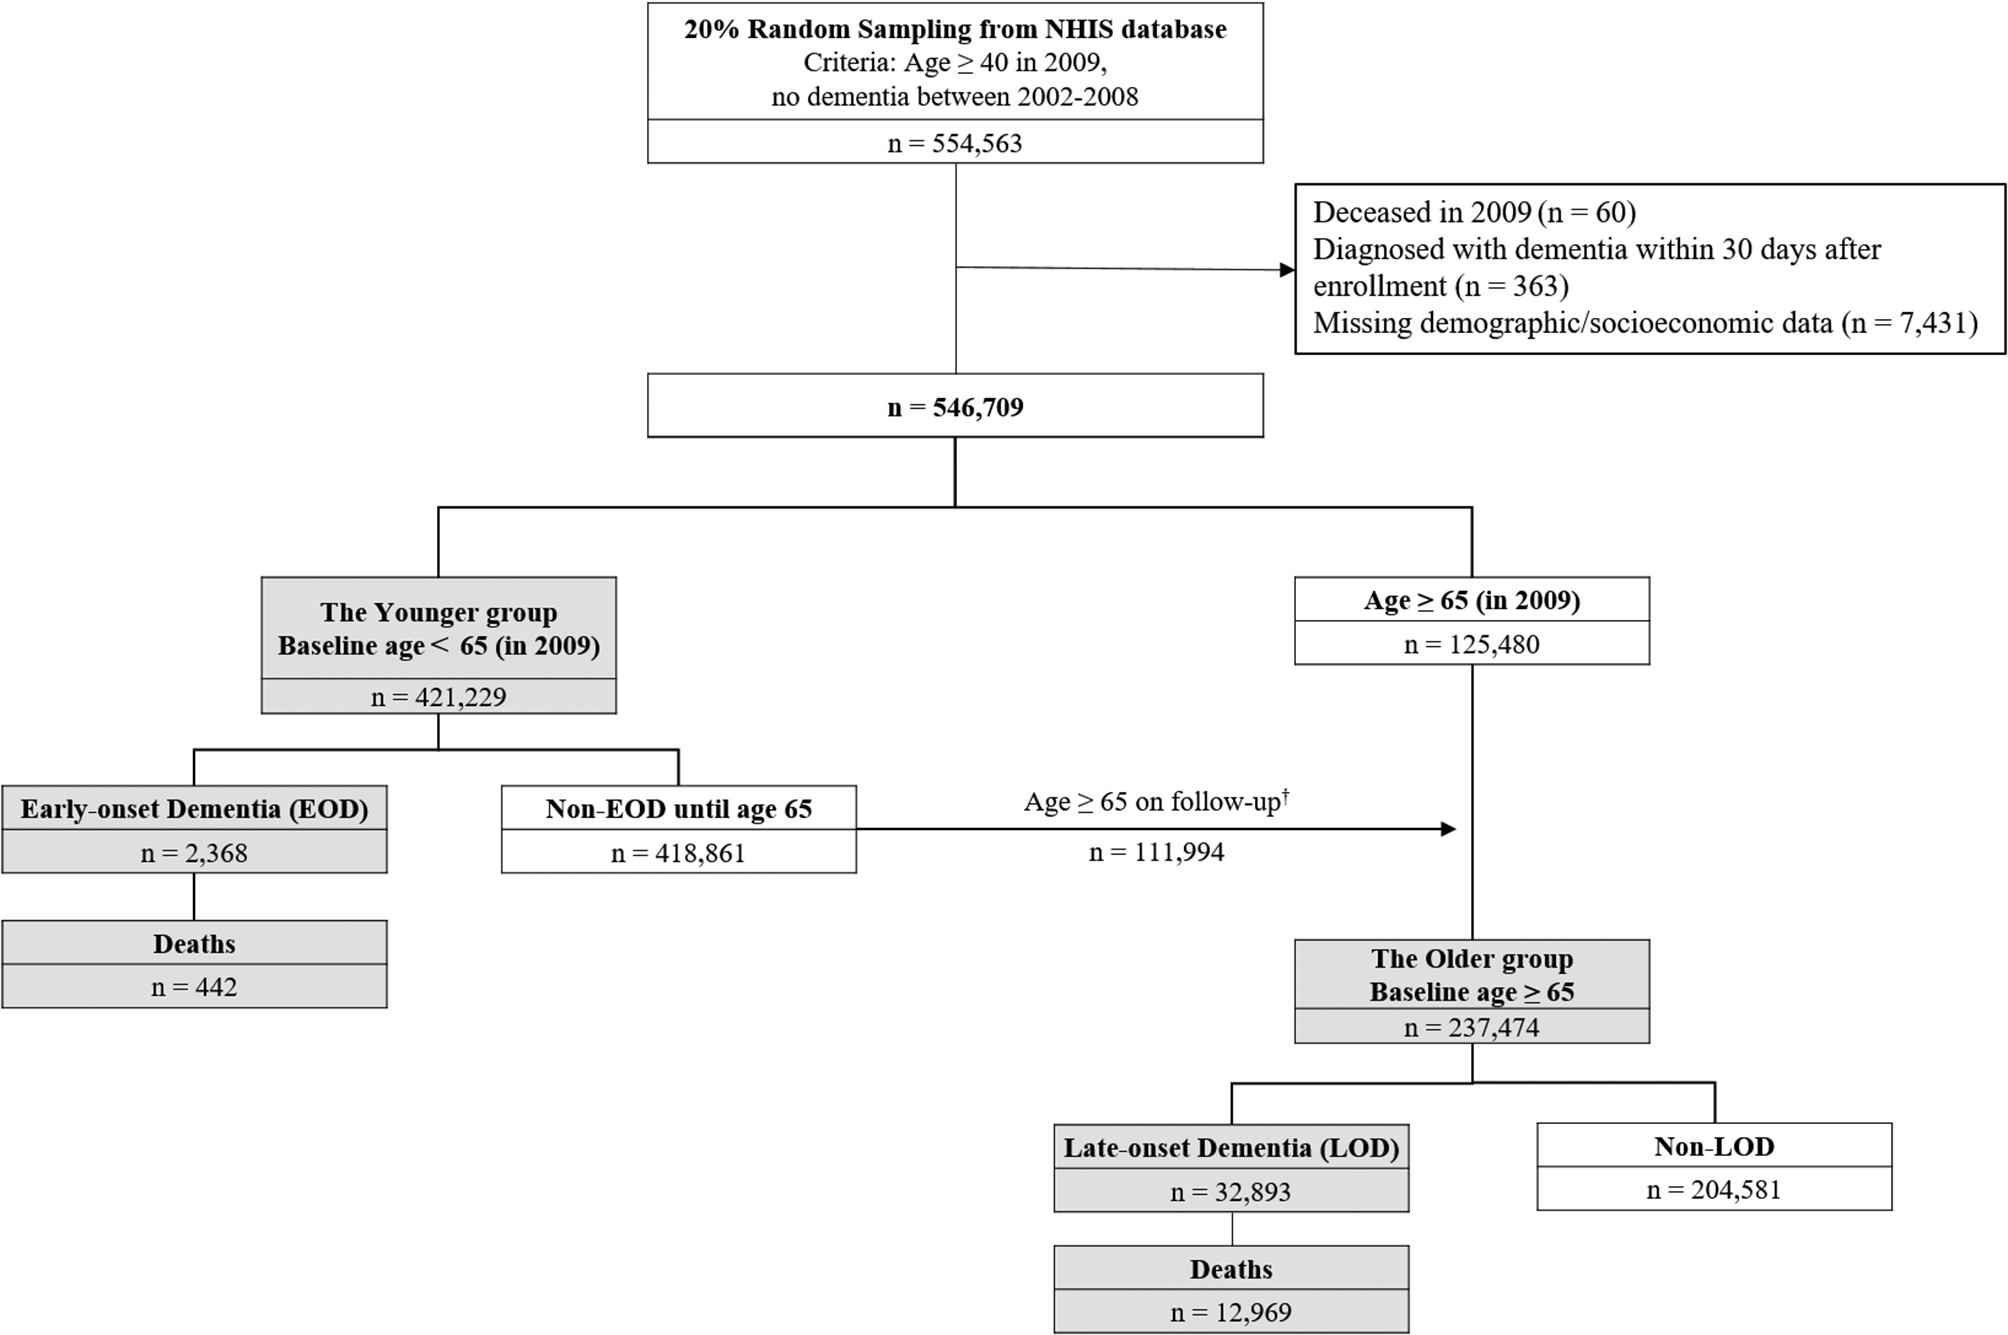 Effects of risk factors on the development and mortality of early- and late-onset dementia: an 11-year longitudinal nationwide population-based cohort study in South Korea